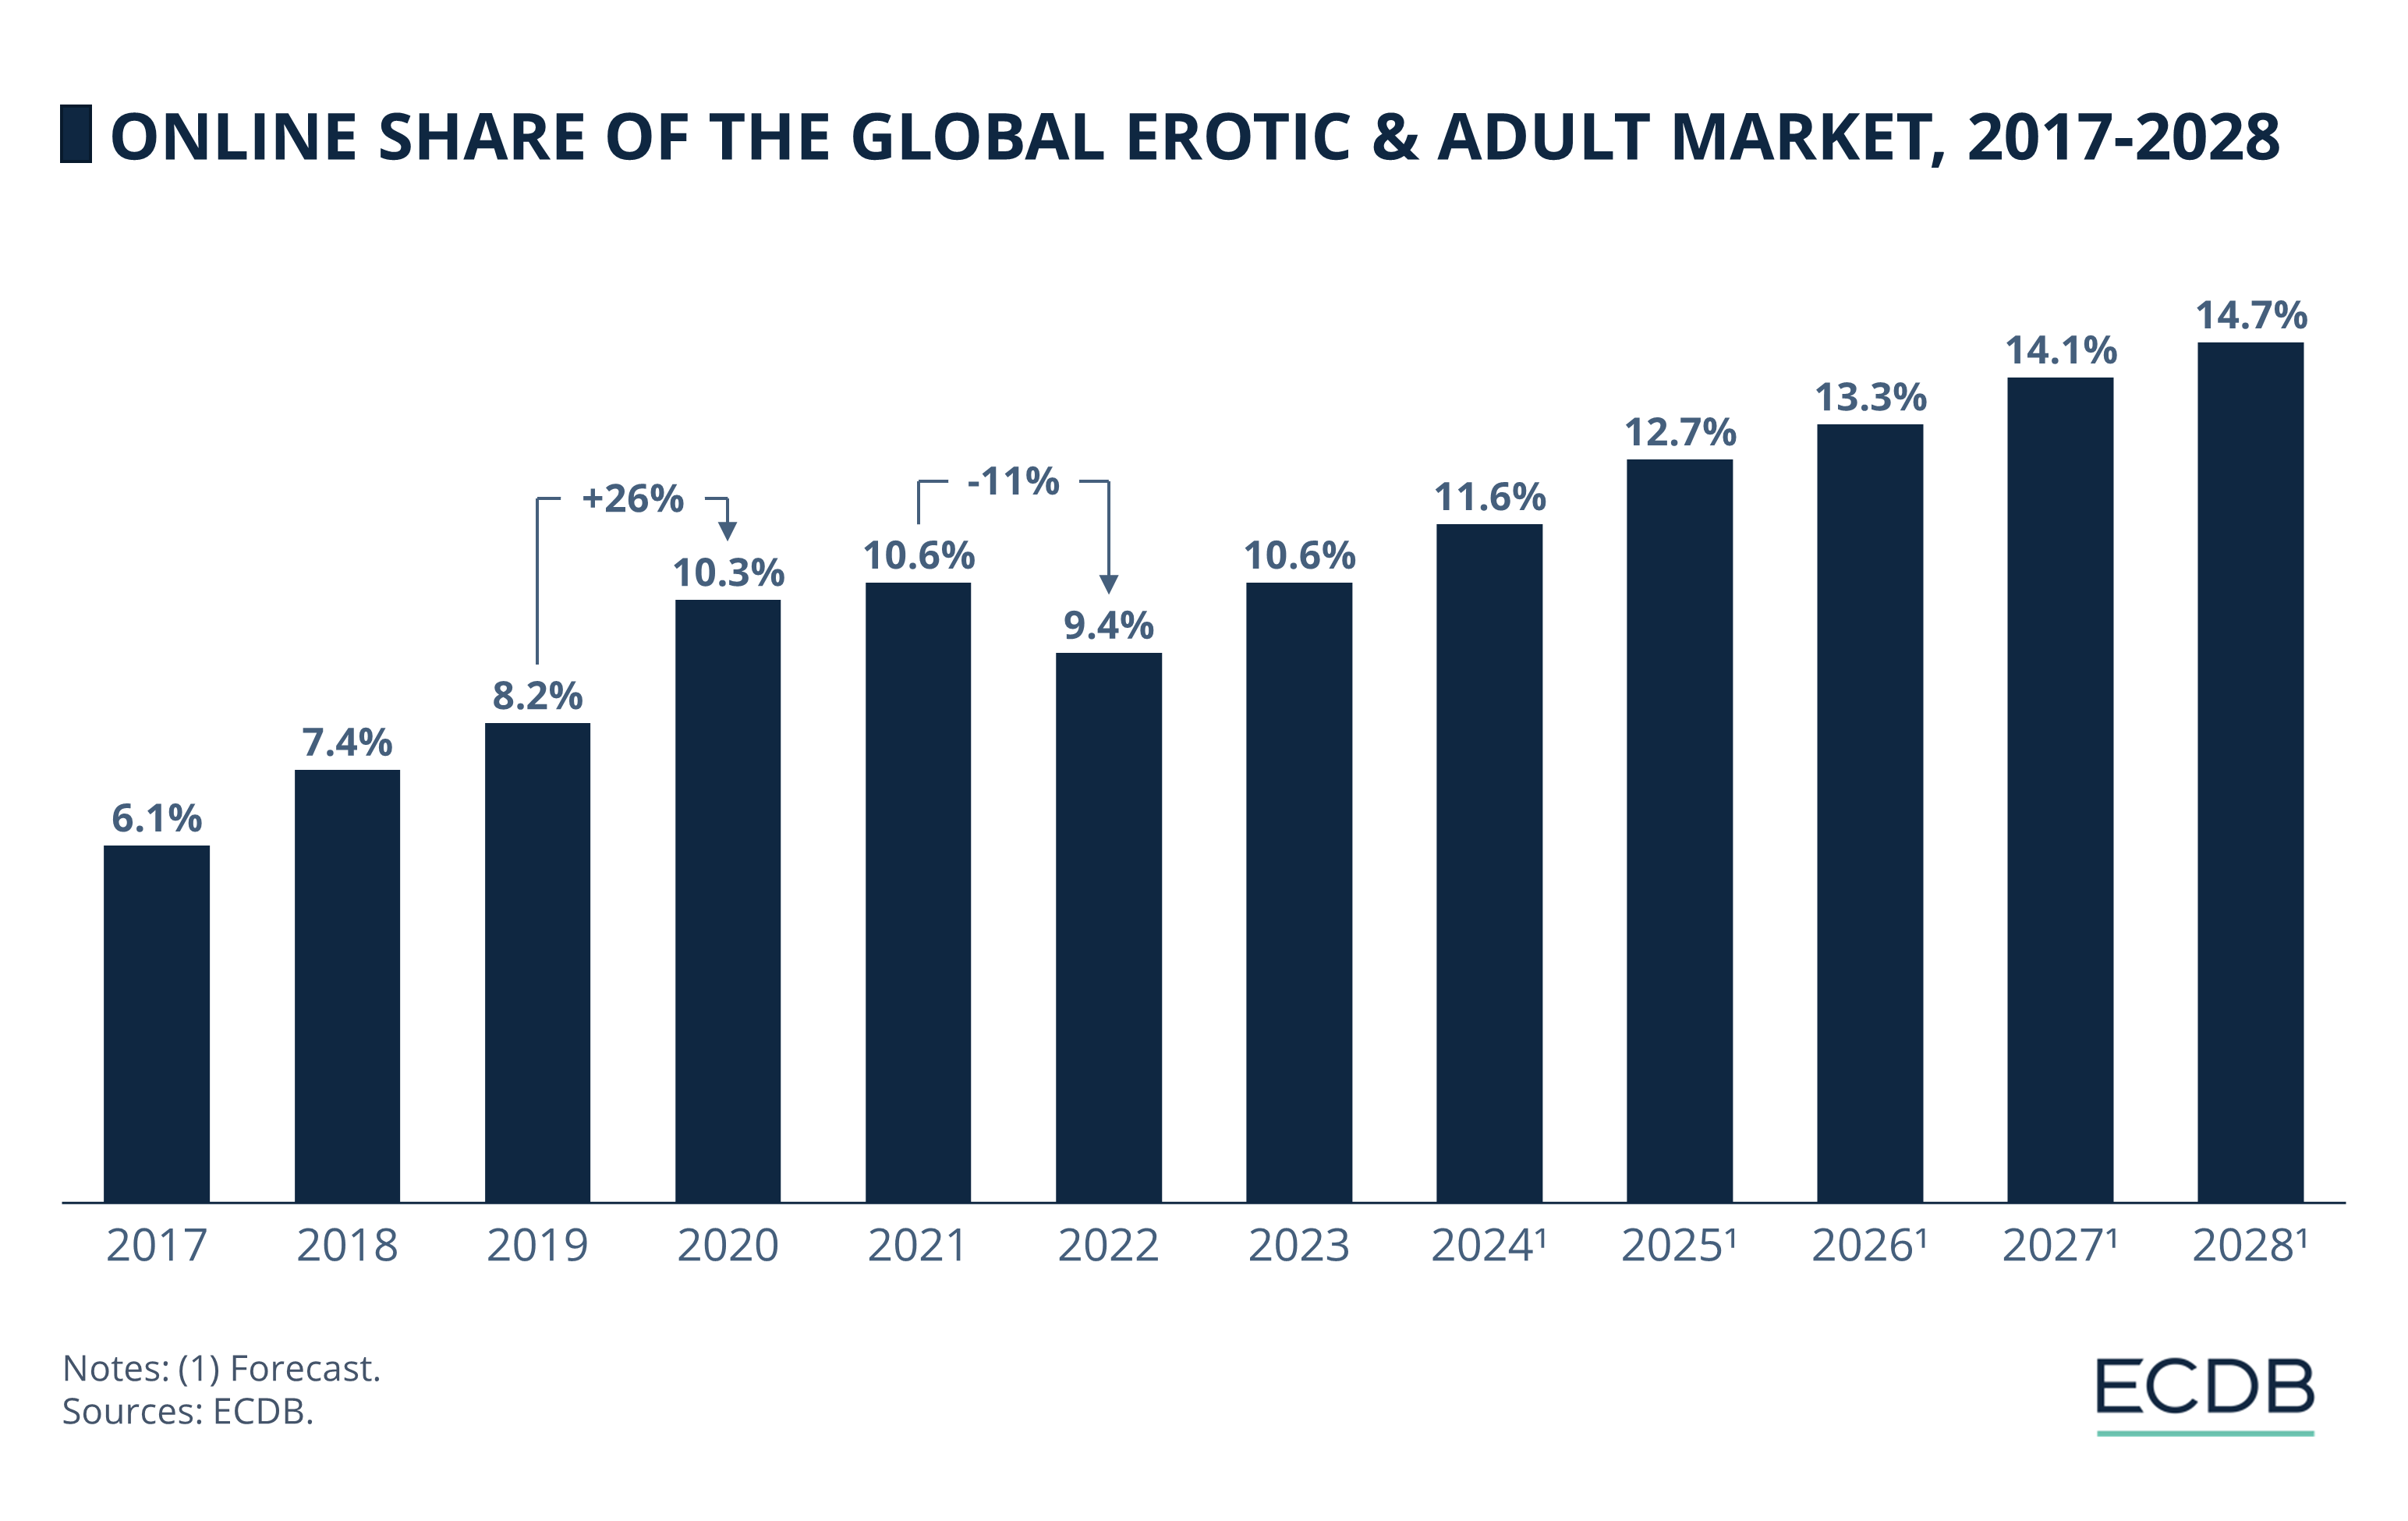 Online Share of the Global Erotic & Adult Market, 2017-2028